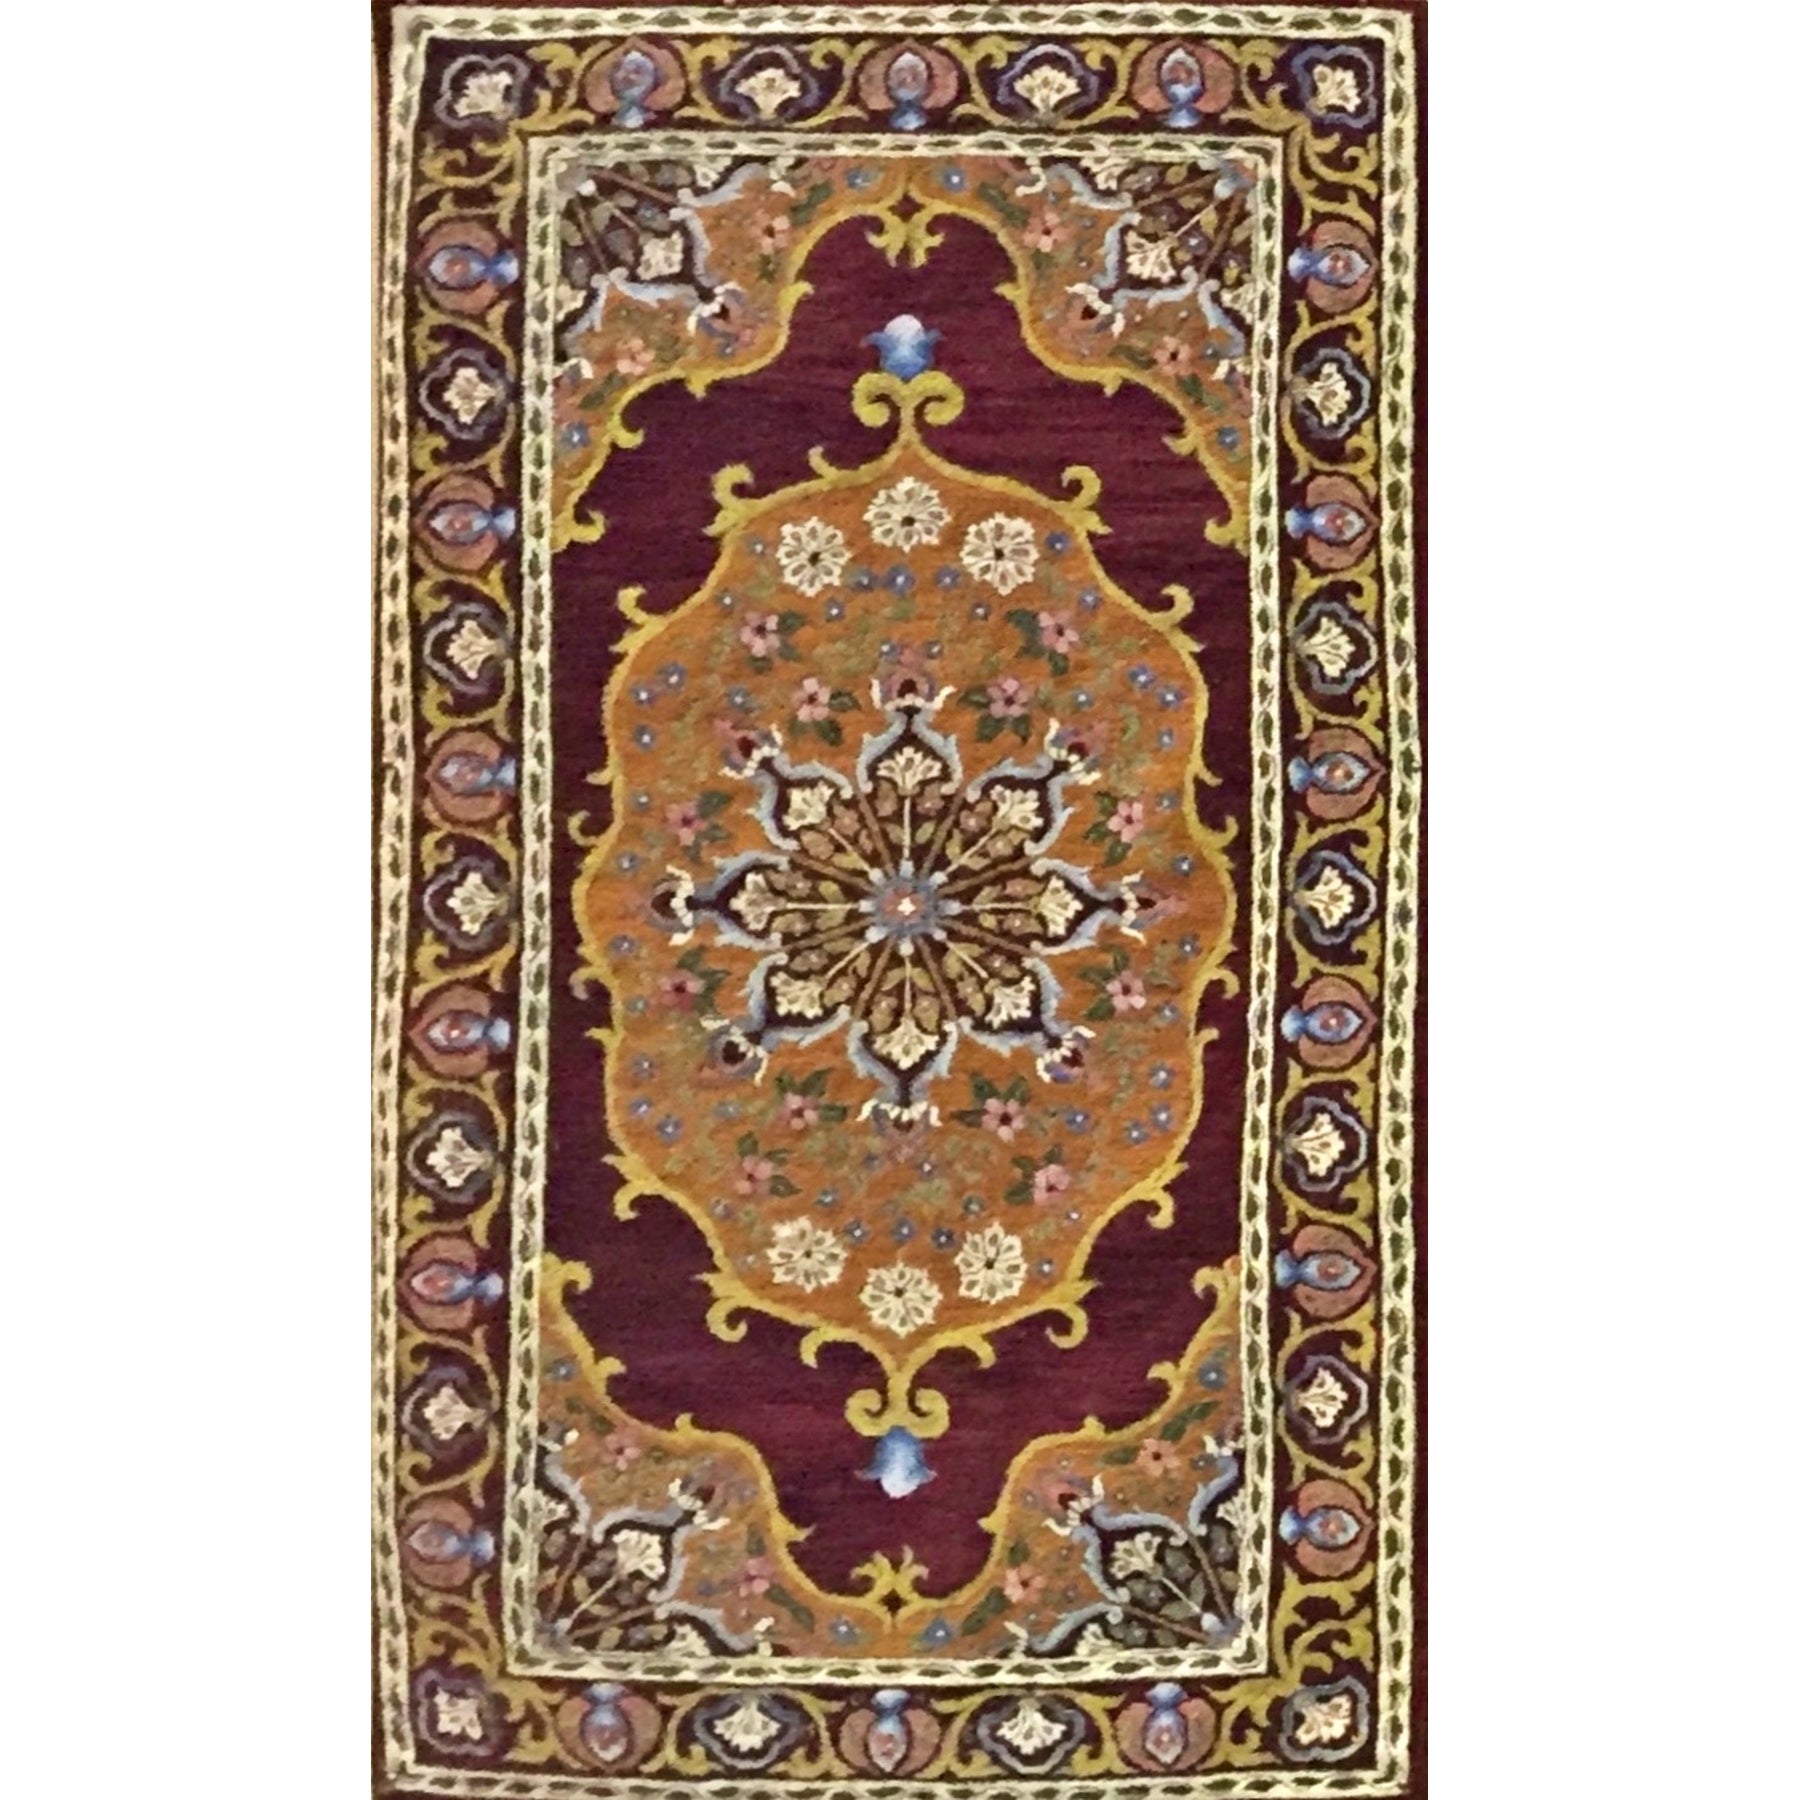 Tabriz, rug hooked by Jane McGown Flynn